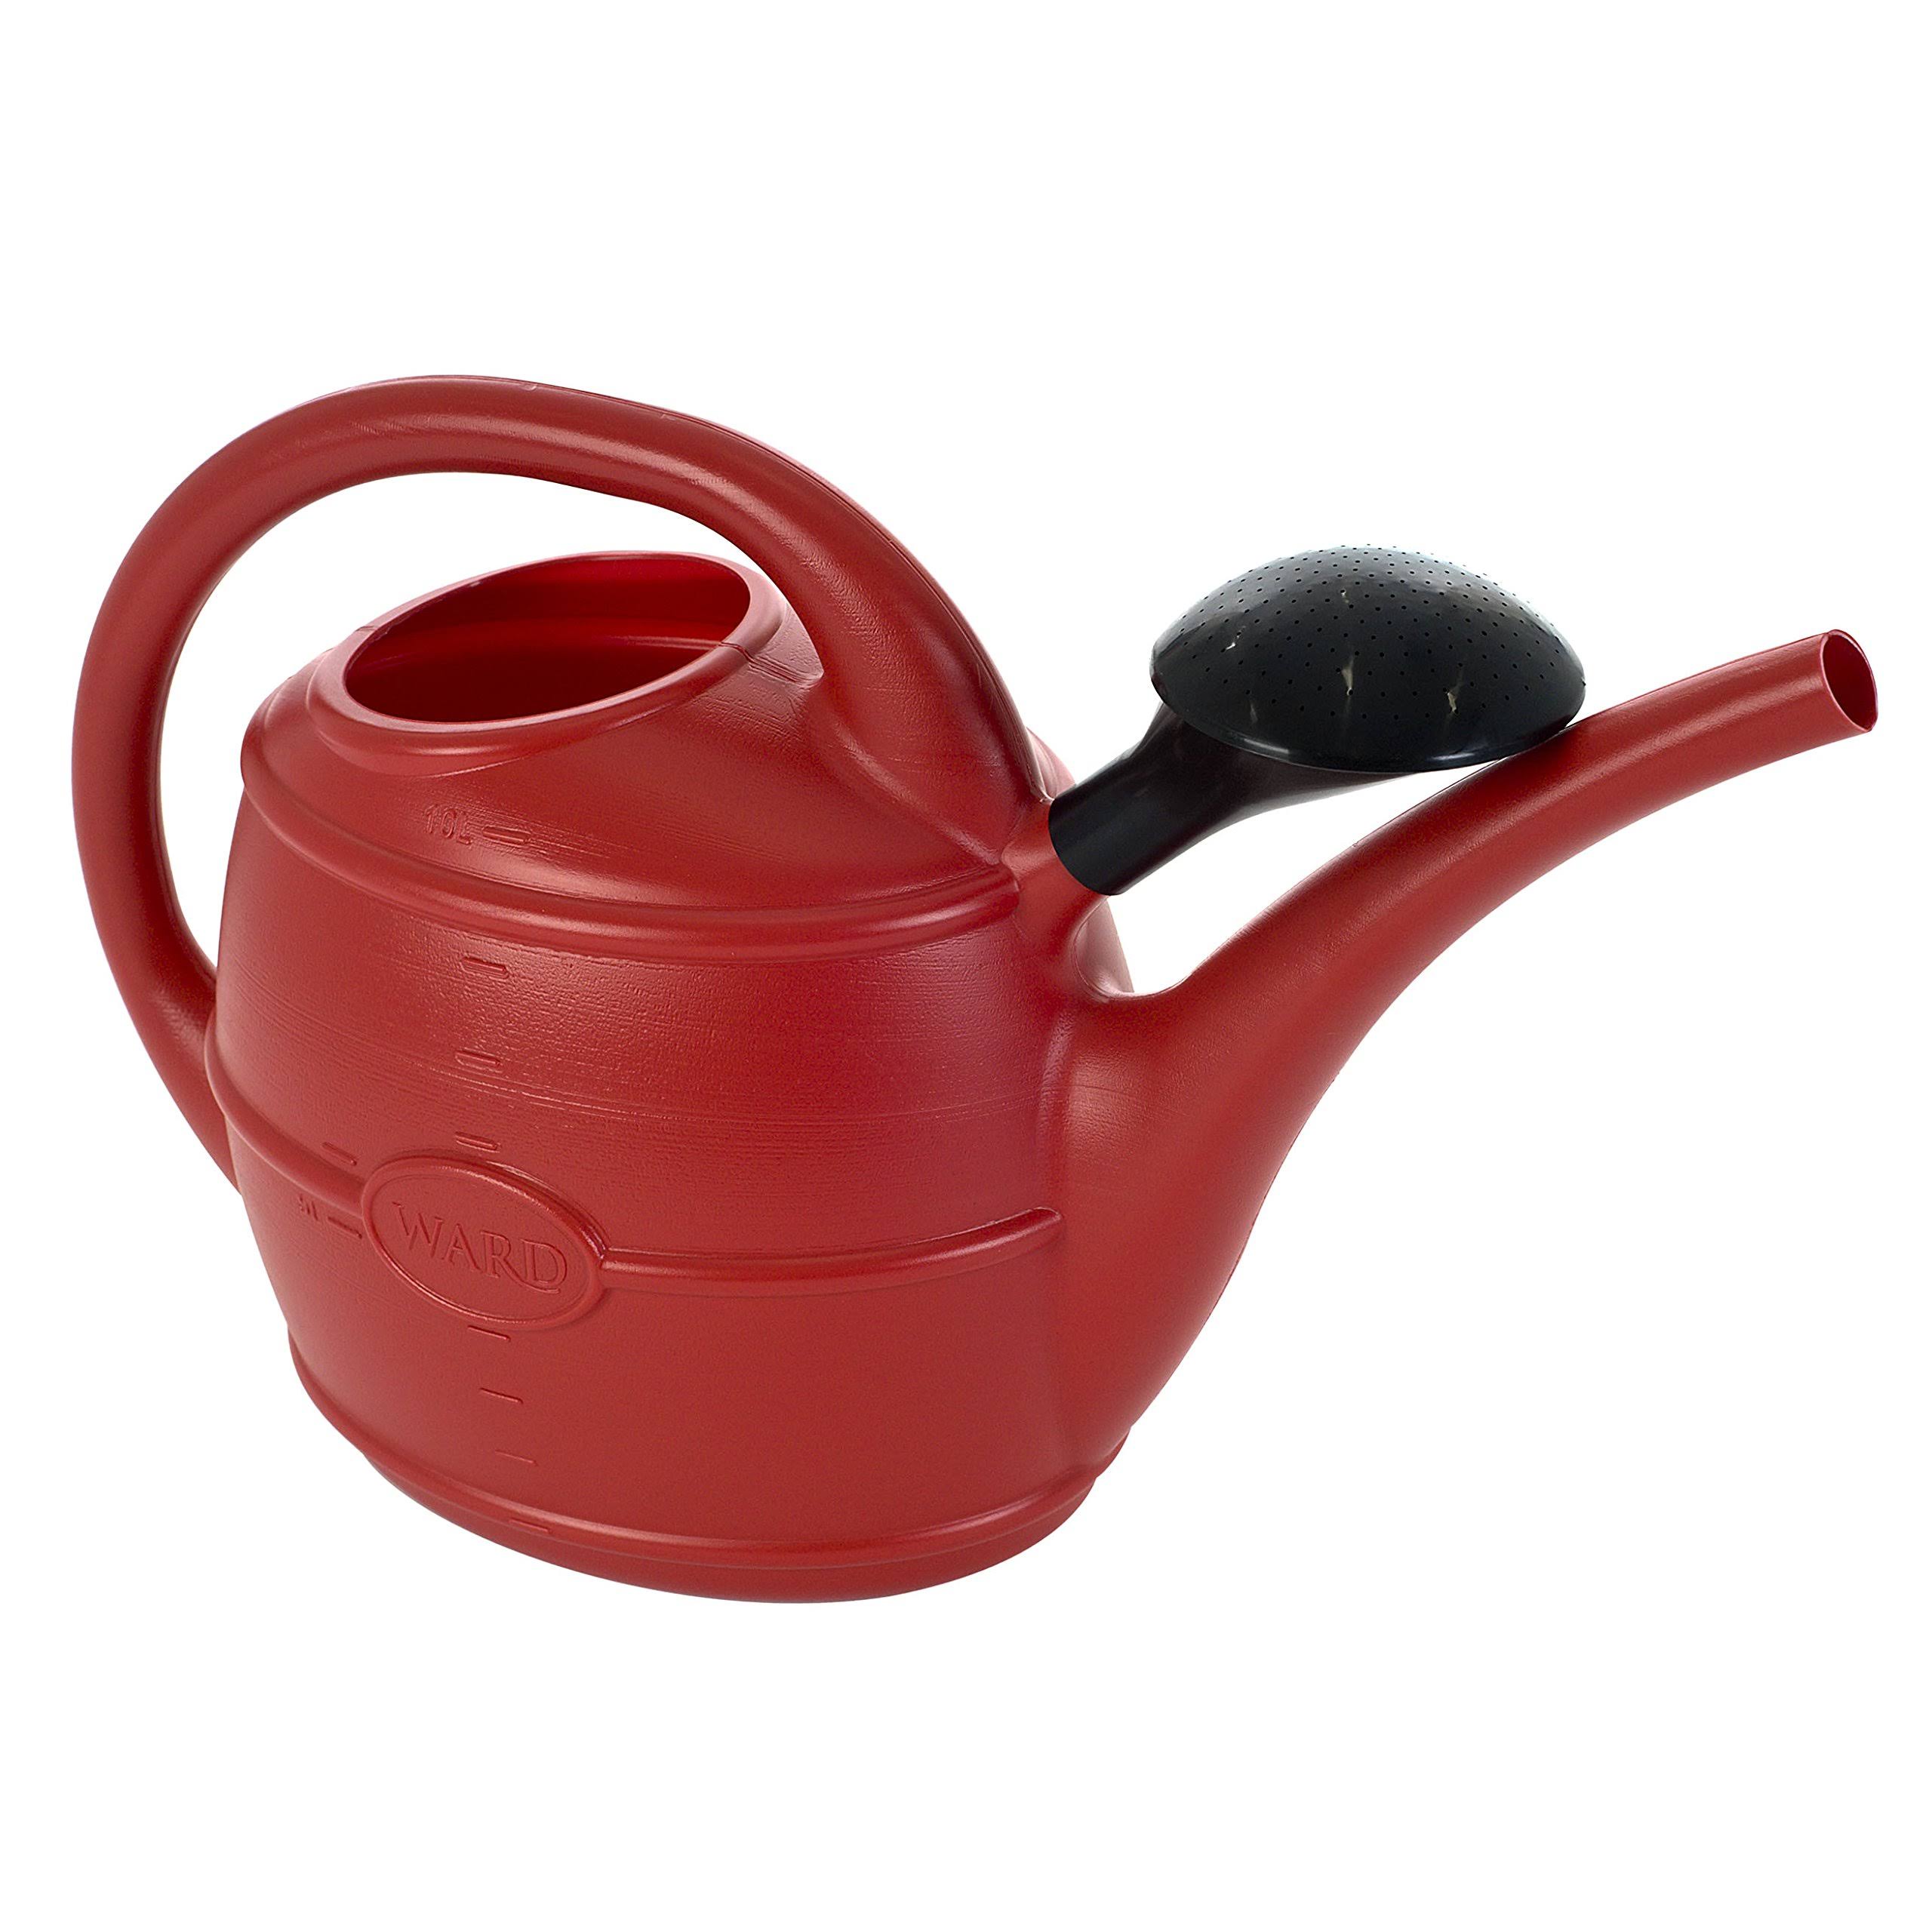 Ward Garden Watering Can - Red, 10L